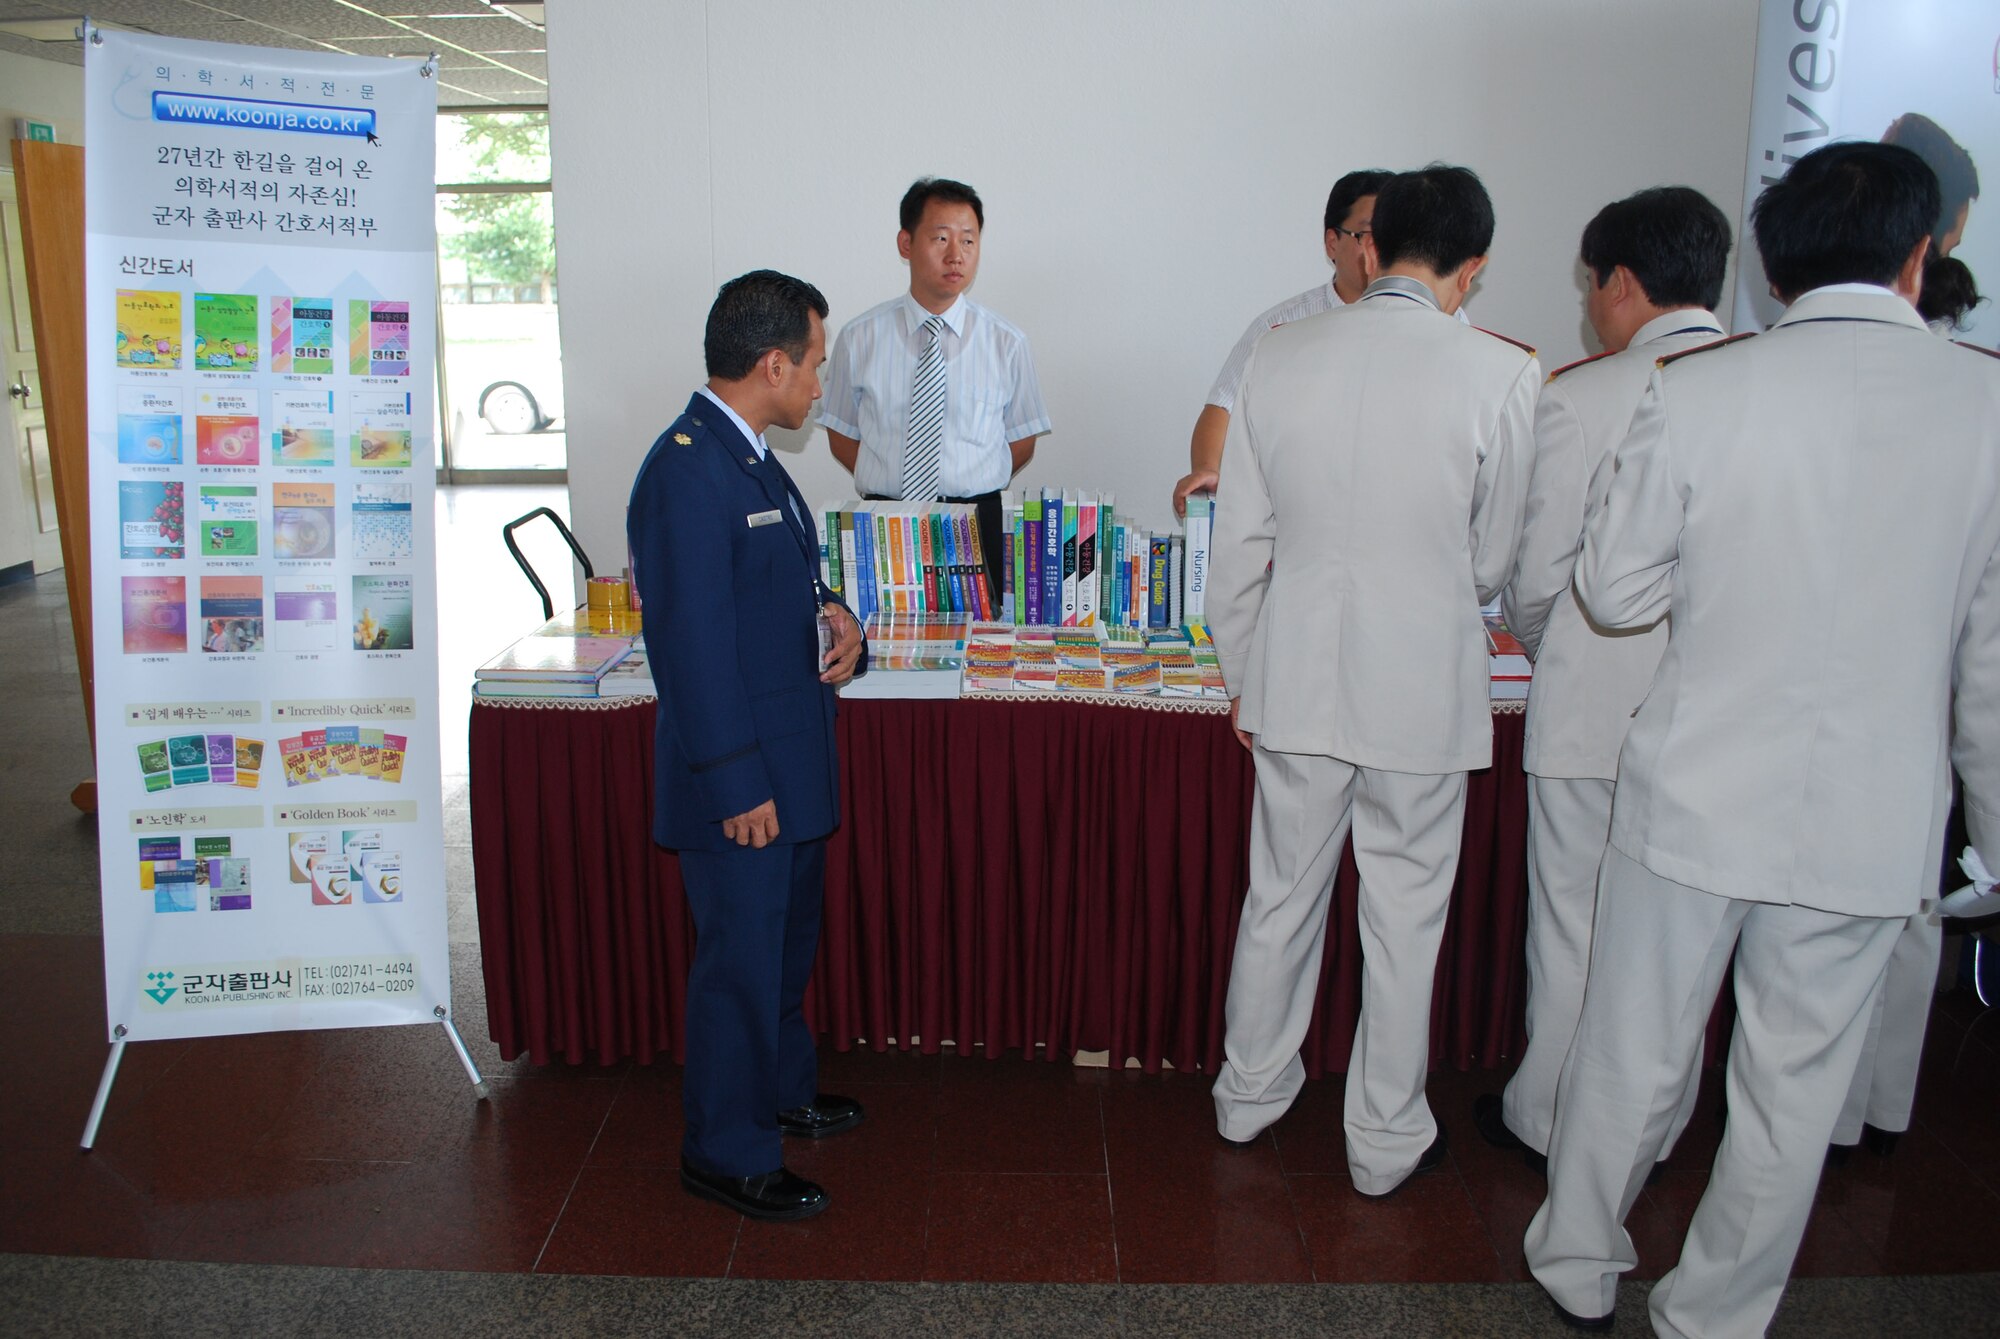 Maj. Edilbert Castro, Air Force Reserve 624th Aeromedical Staging Squadron, examines nursing displays set out during the second annual Asia Pacific  Military Nursing Conference. Major Castro was one of more than 40 Air Force, Army and Navy nurses and medical professionals who attended the conference with attendees from seven countries Sept. 1-5 at the Korea Armed Forces Nursing Academy in Daejeon, Republic of Korea. The 624th ASTS is part of the 624th Regional Support Group, Hickam Air Force Base, Hawaii.